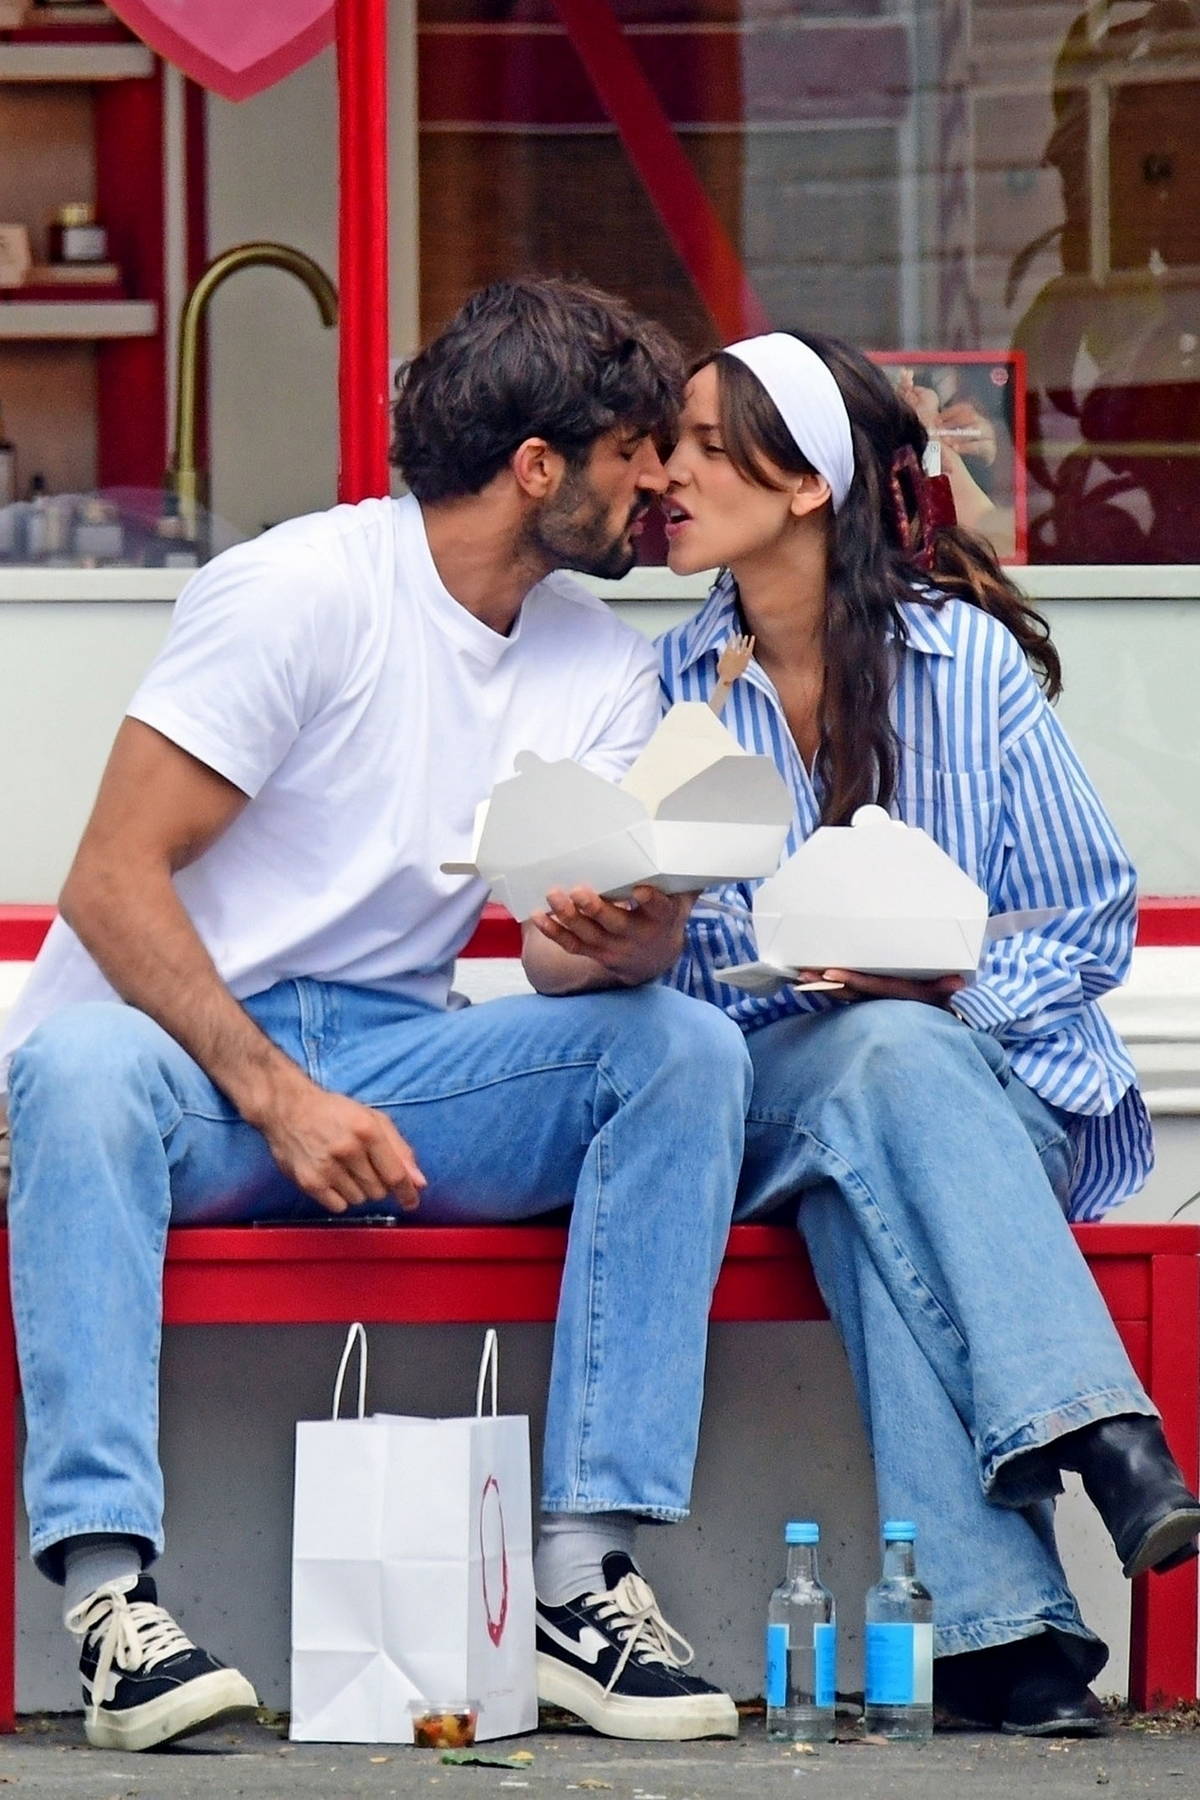 Eiza Gonzalez packs on some serious PDA with boyfriend Guy Binns while enjoying a lunch date in London, England